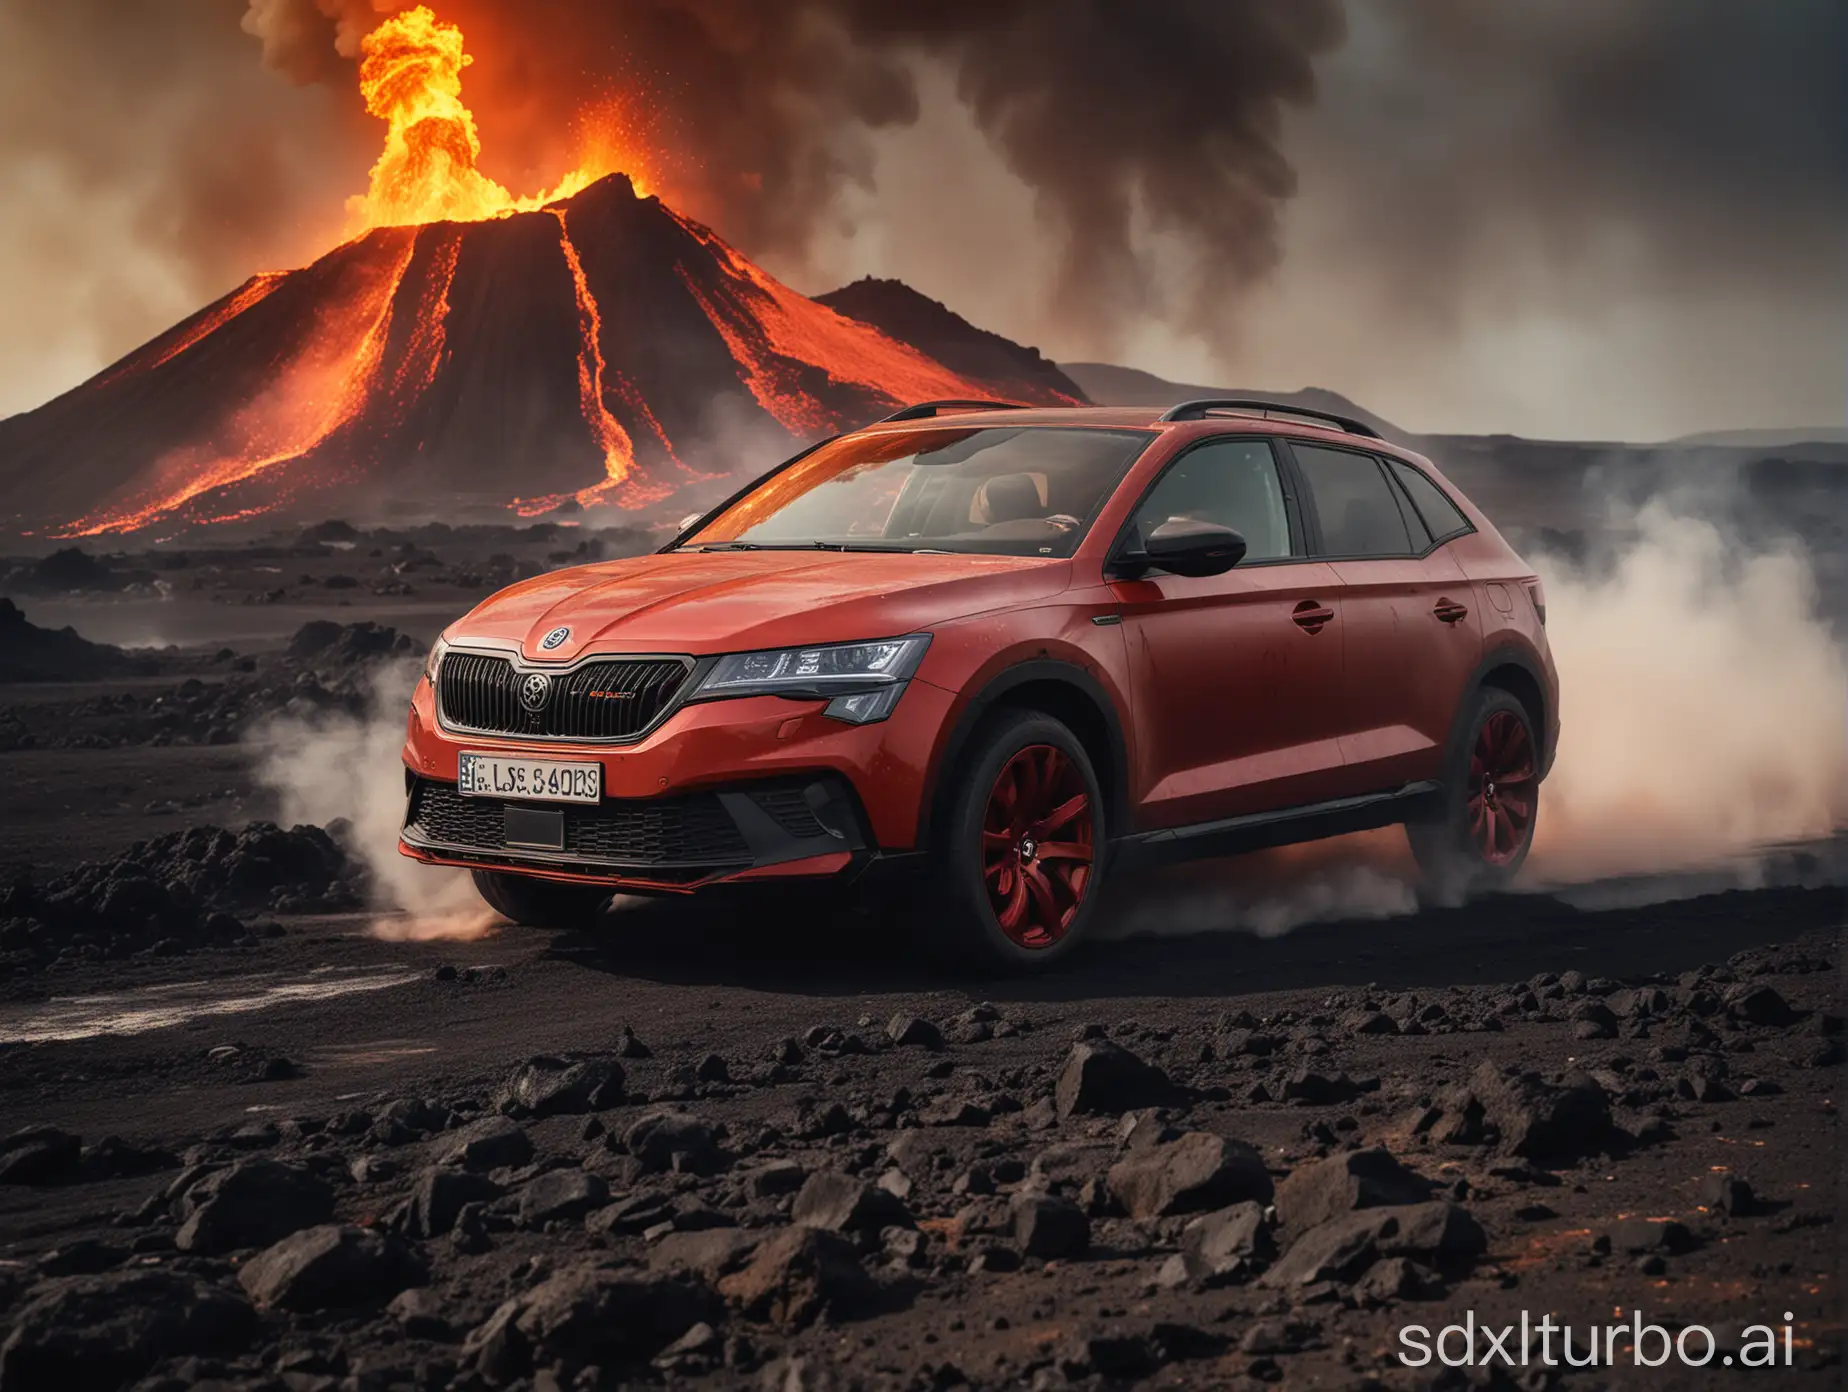 professional front portrait photo of Skoda Camiq car driving over hot lava field. Extensive smoke coming from lava.Volcano in far background. Matte dark red paint. Offroad bumper. Bokeh. Shot taken from front. wheels on fire